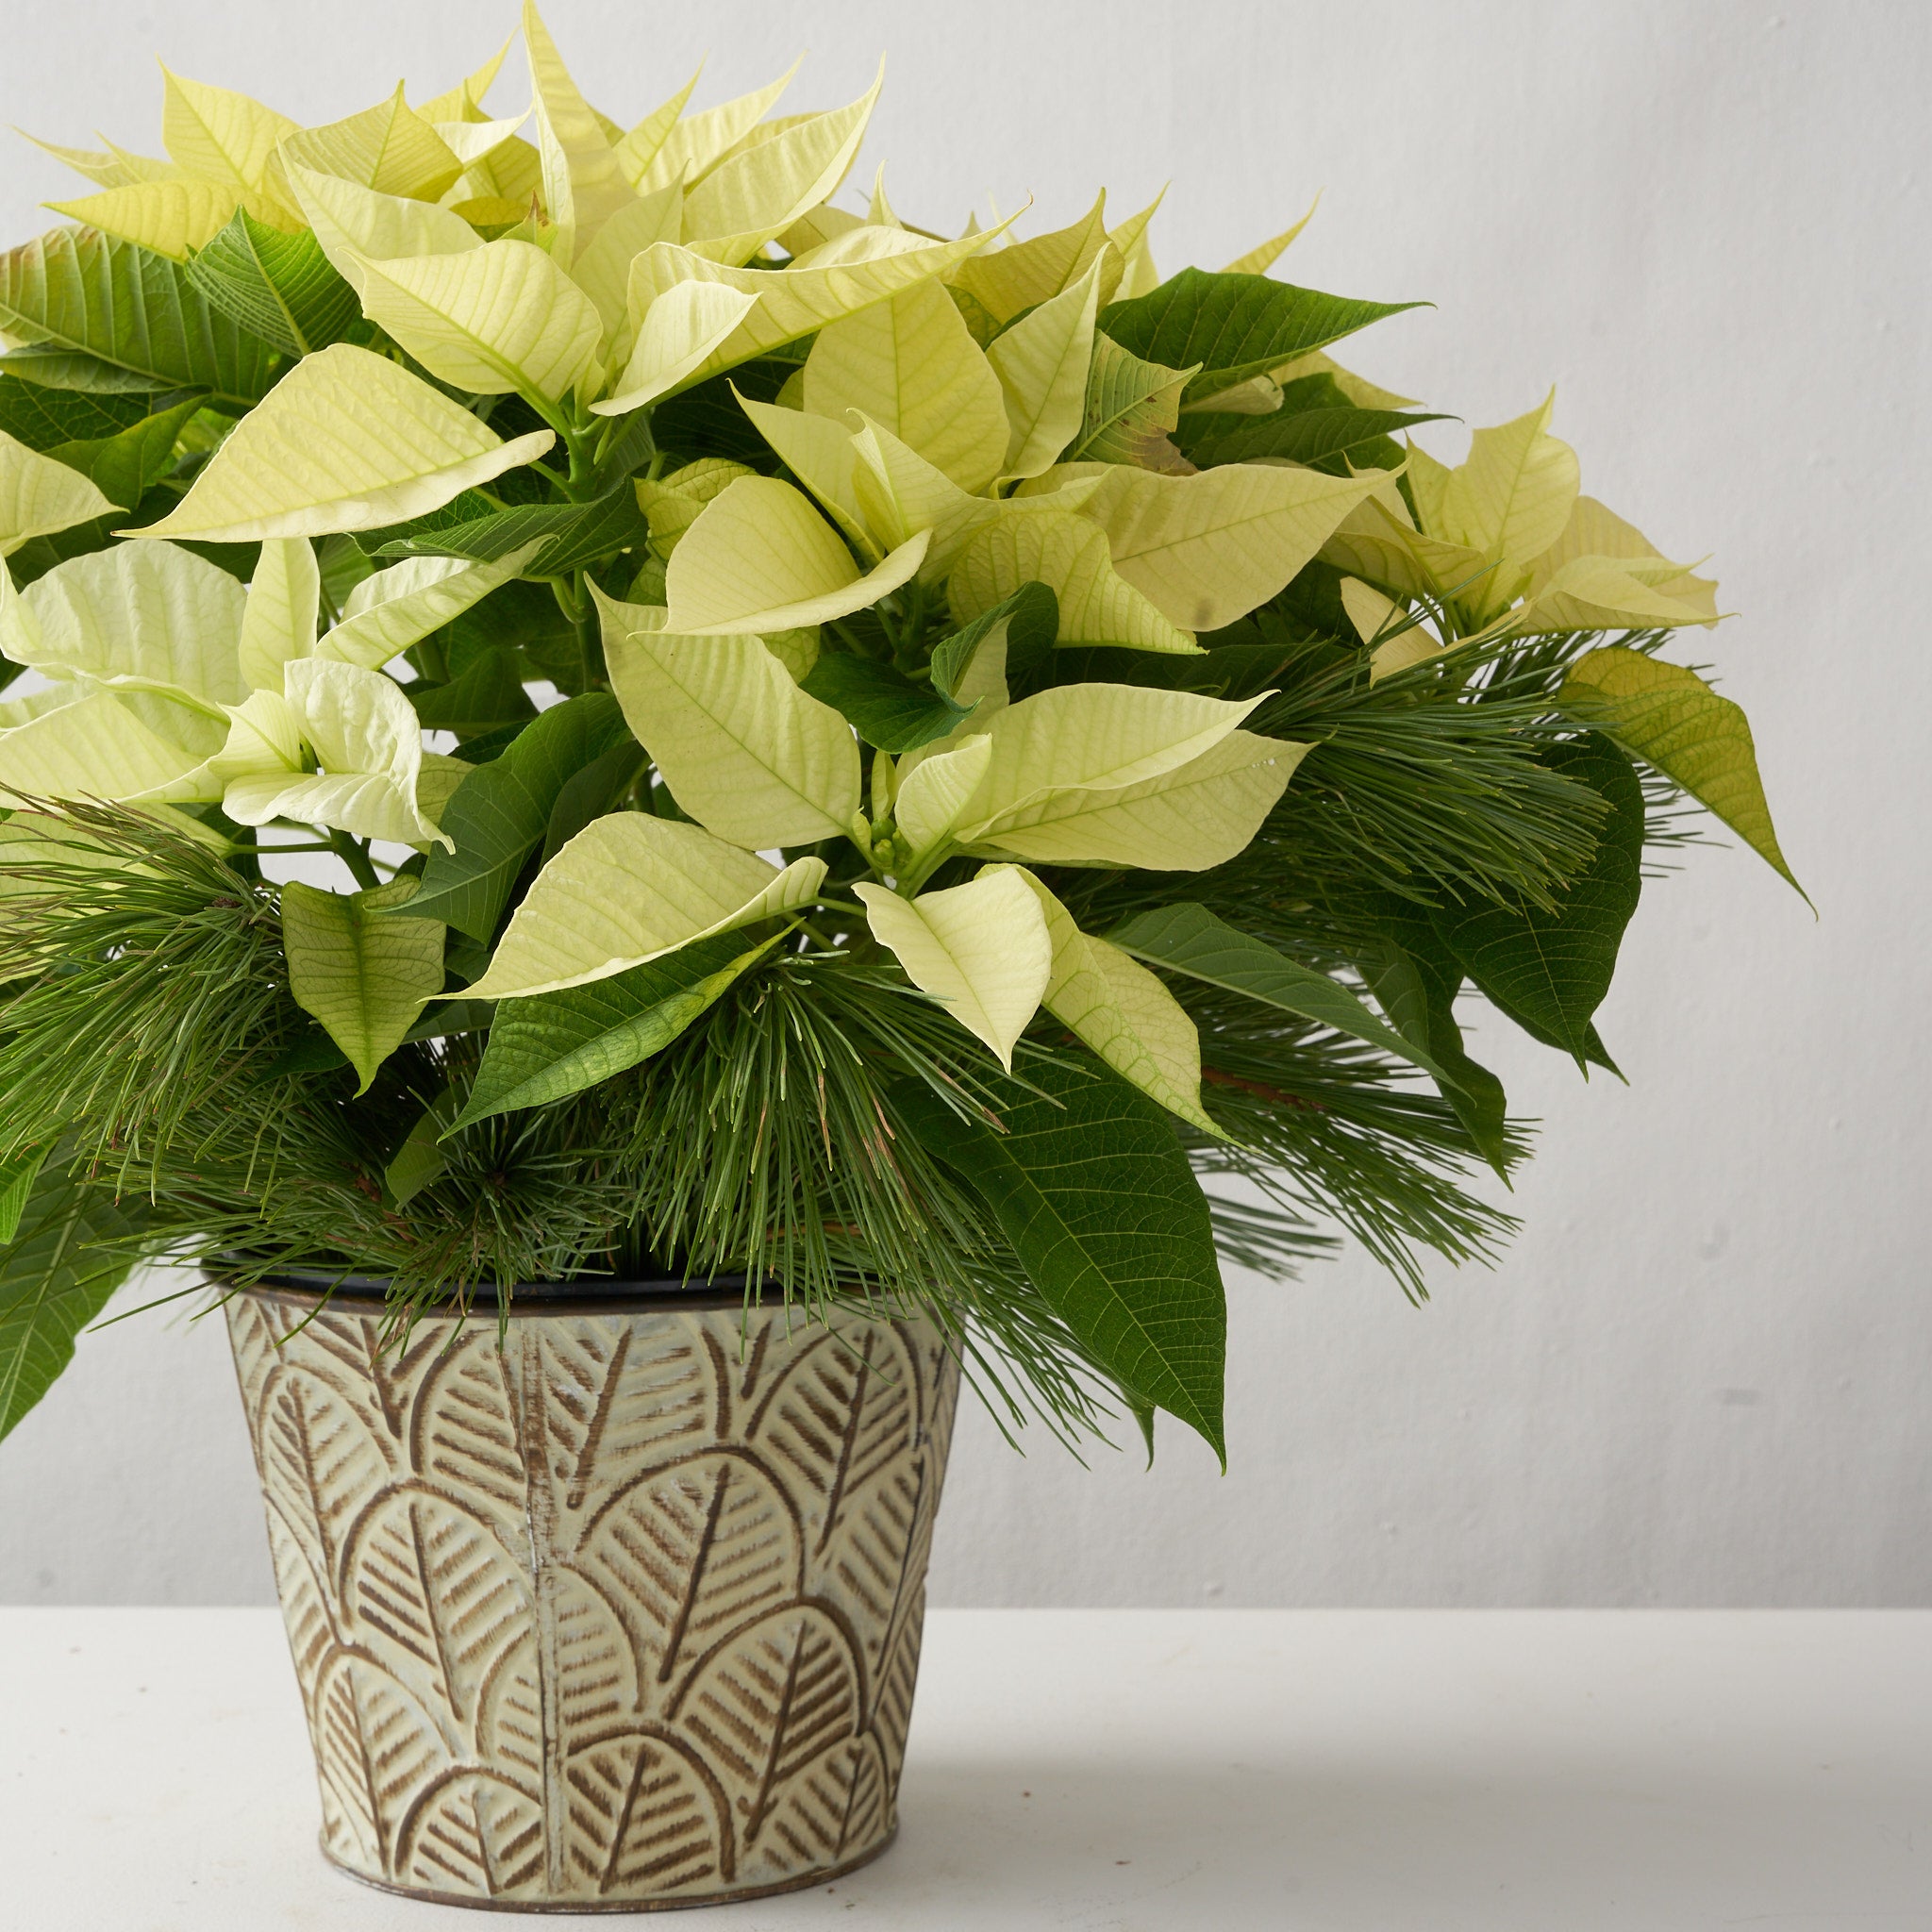 White poinsettia in a decorative pot with pine.